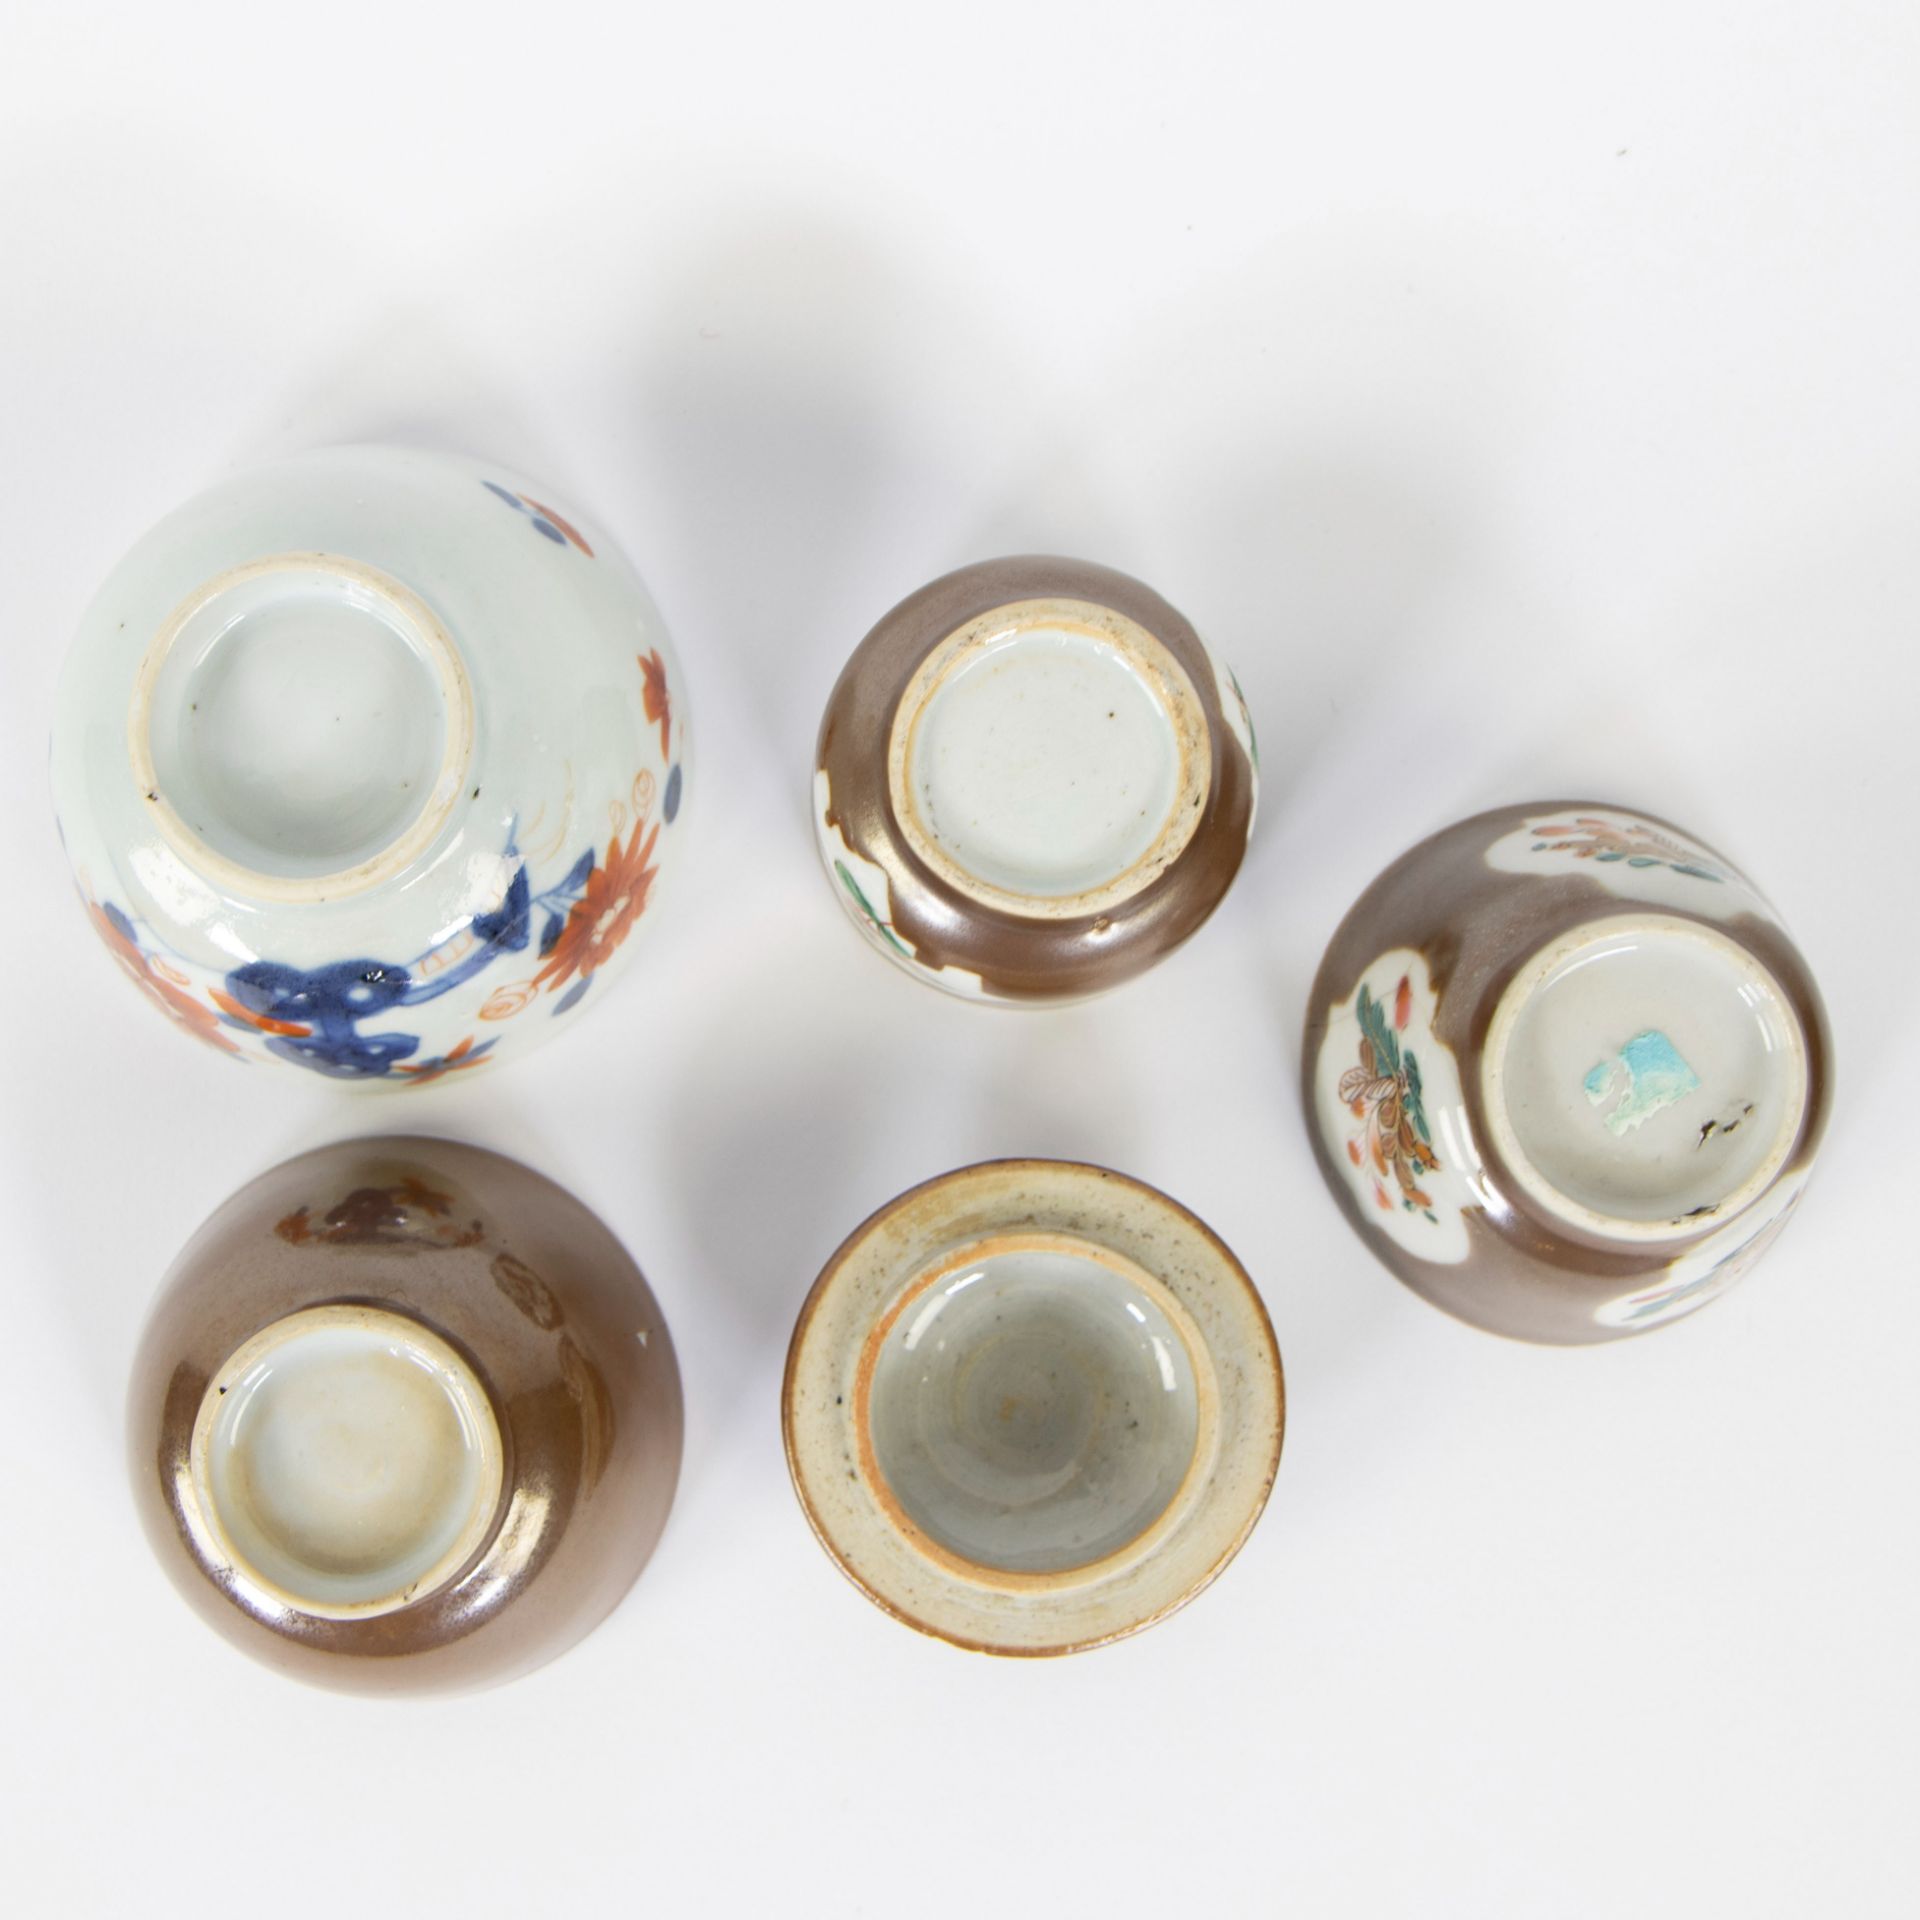 A set of Chinese batavia brown cups and saucers, one Imari cup and 2 plates blue/white, 18th C. - Image 9 of 11